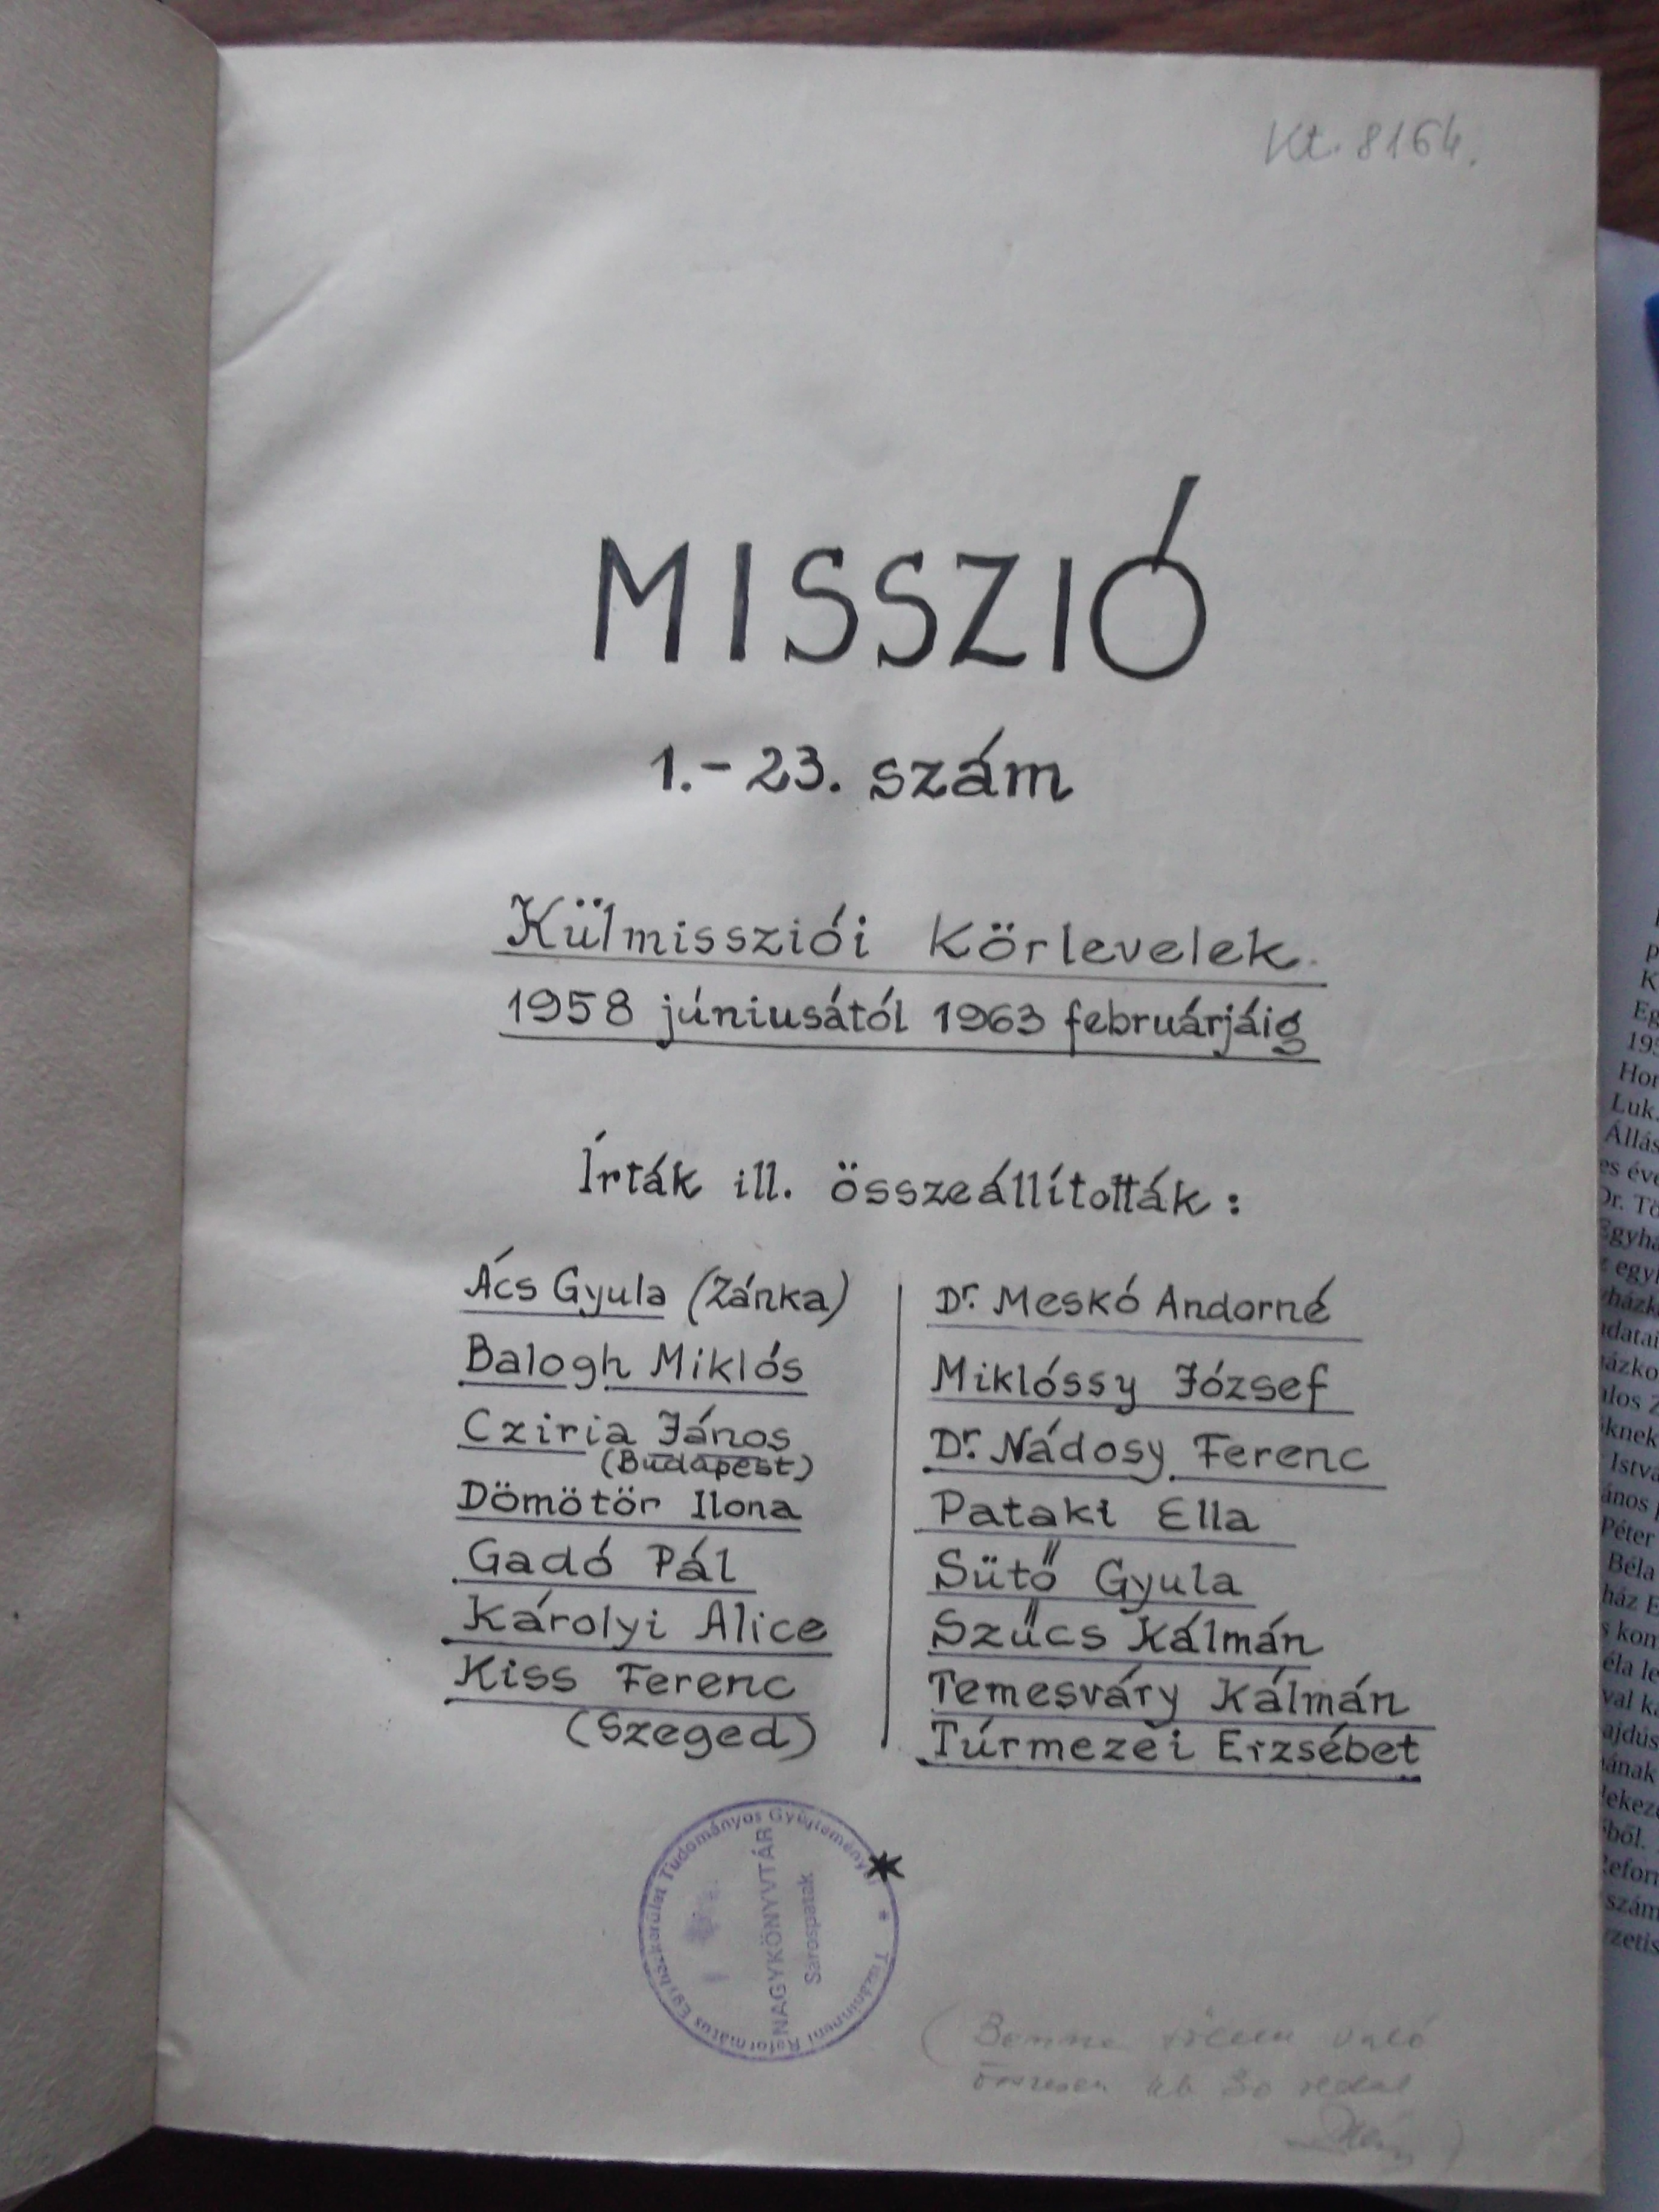 The front page of the issues of the 'Mission' samizdat periodical, 1963.